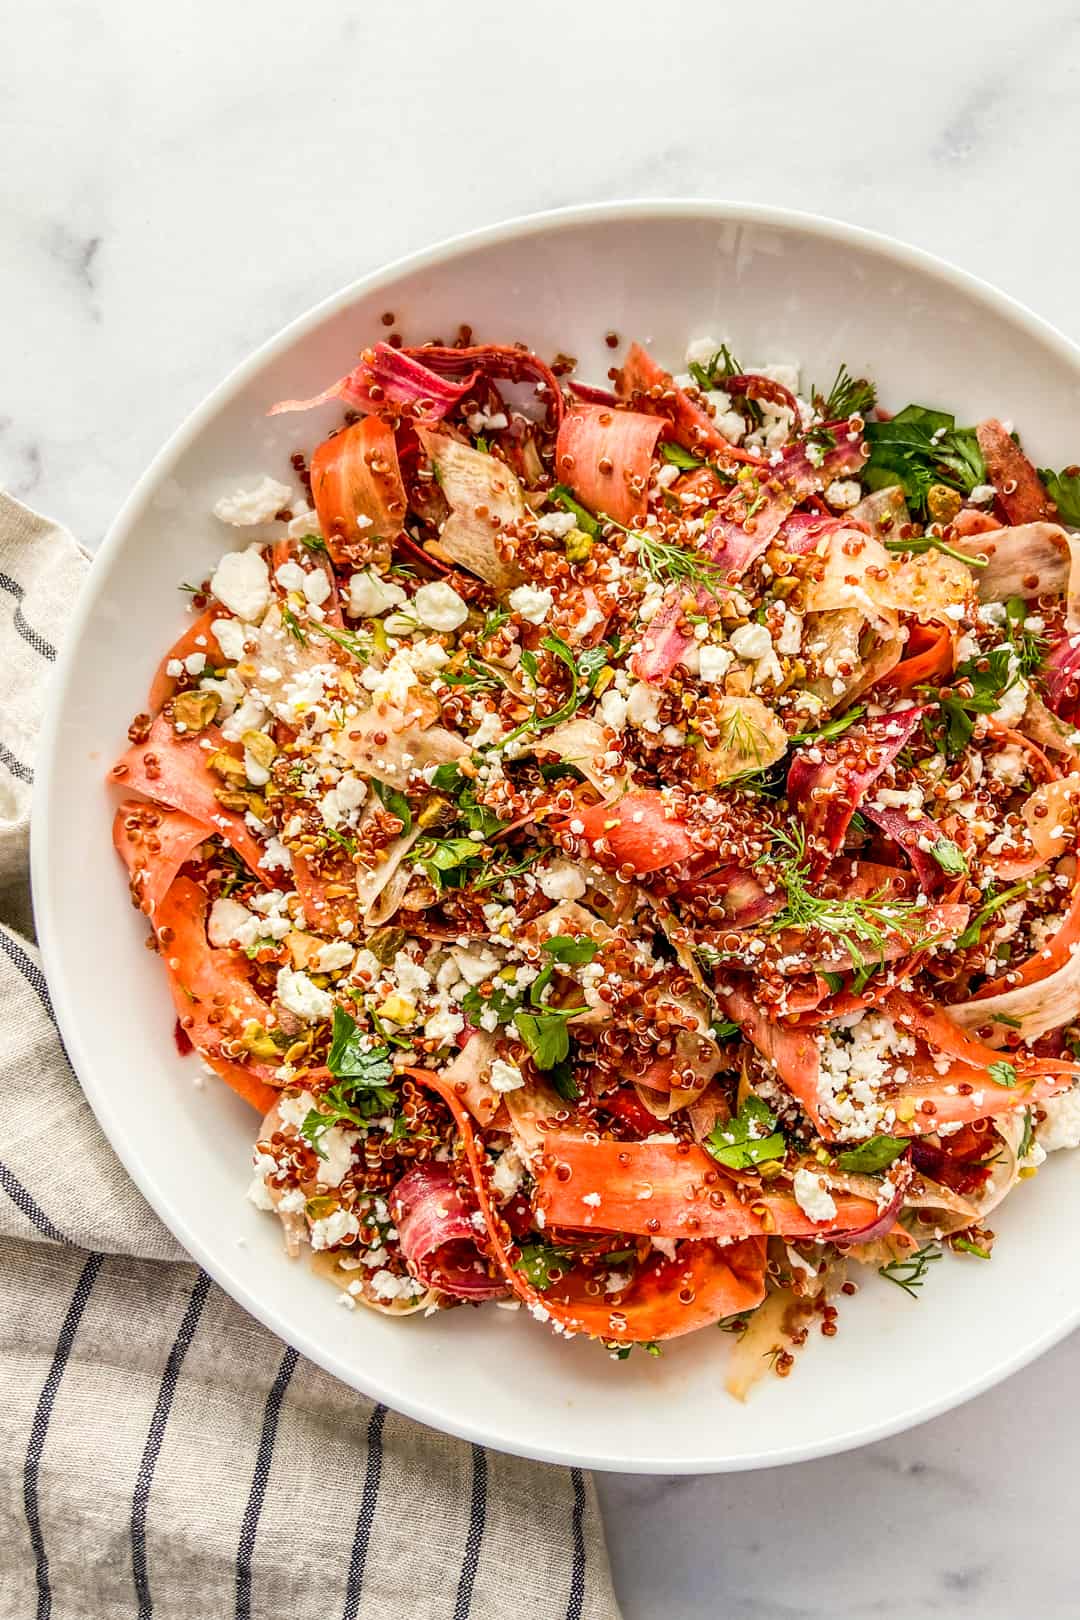 Rainbow carrot quinoa salad in a white serving bowl.